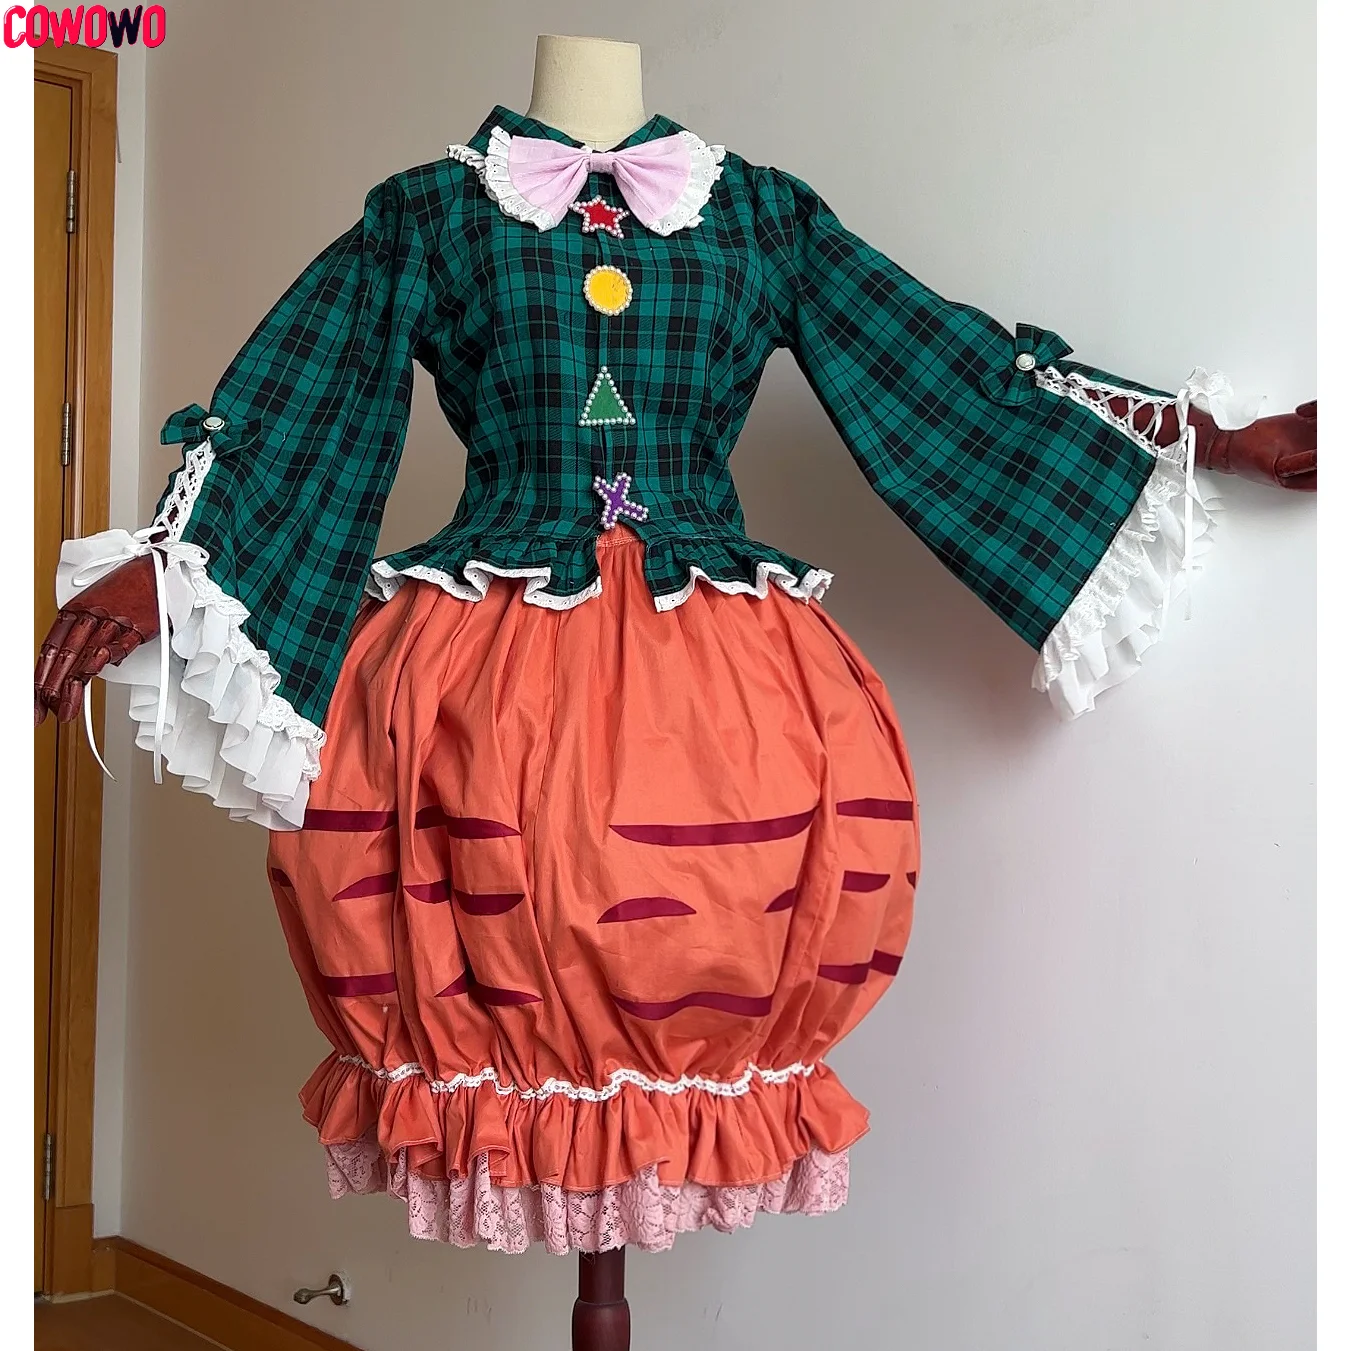 

COWOWO Touhou Project Hata No Kokoro Two Sets Dress Cosplay Costume Cos Game Anime Party Uniform Hallowen Play Role Clothes